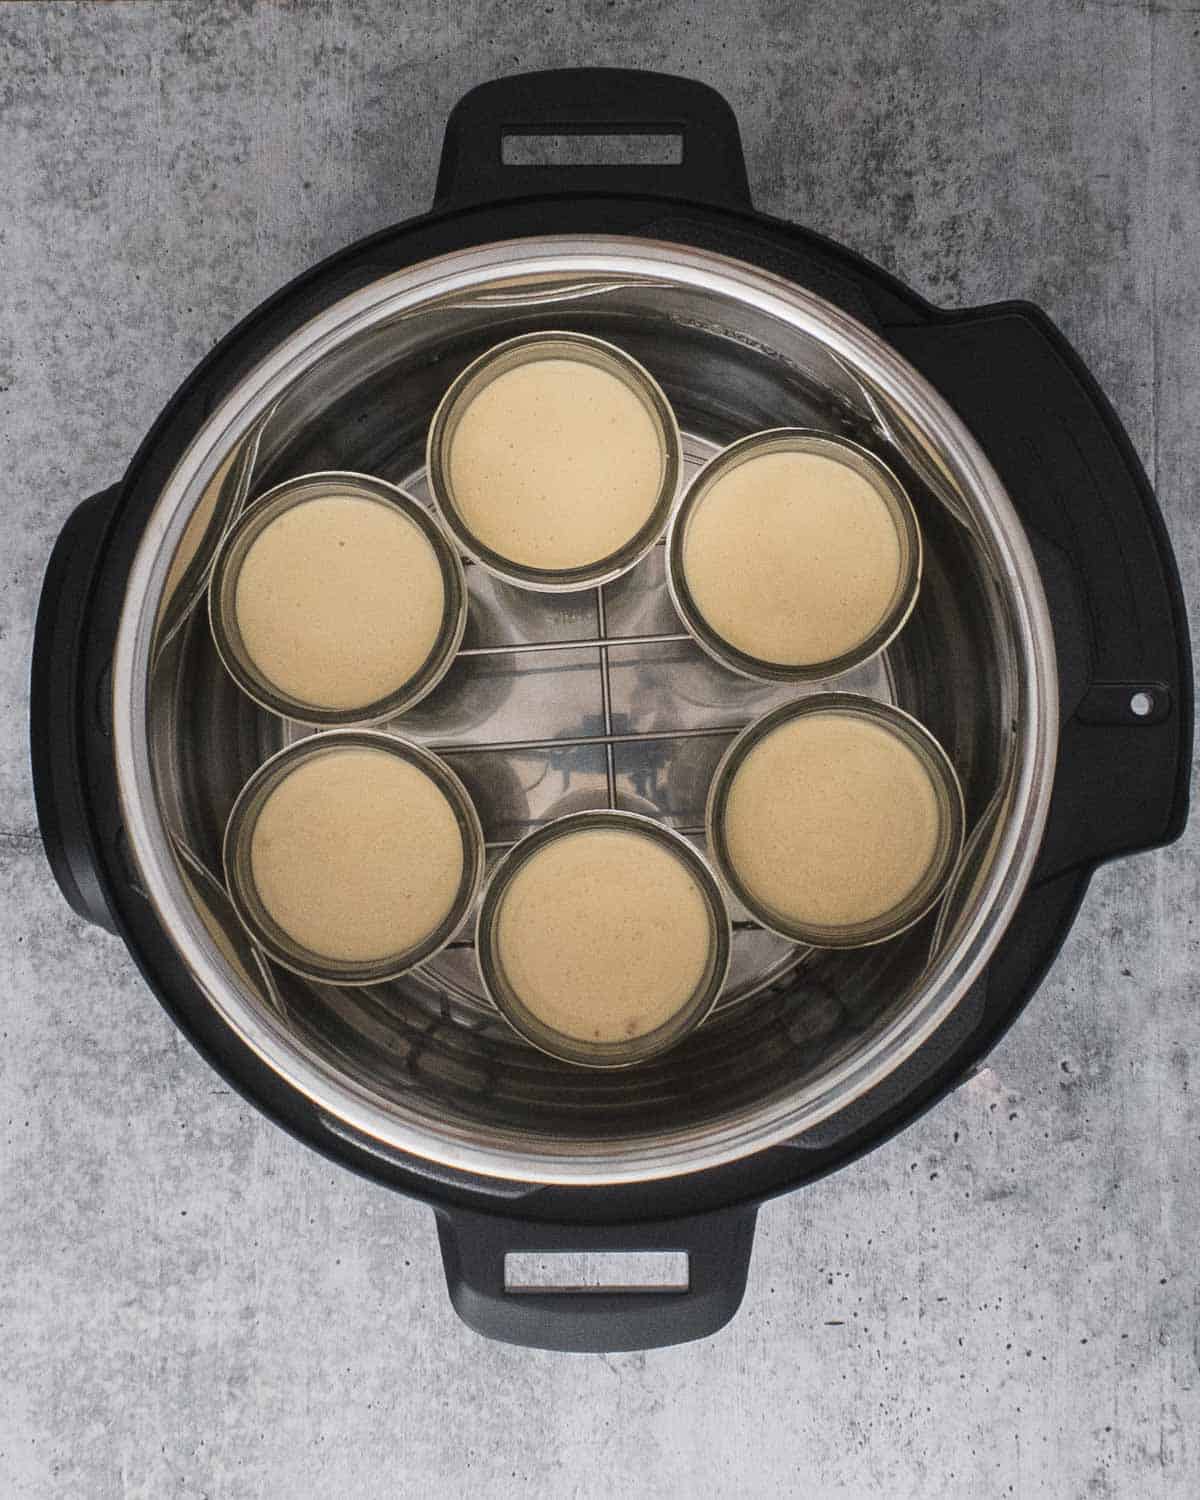 cheesecake served in molds inside the instant pot